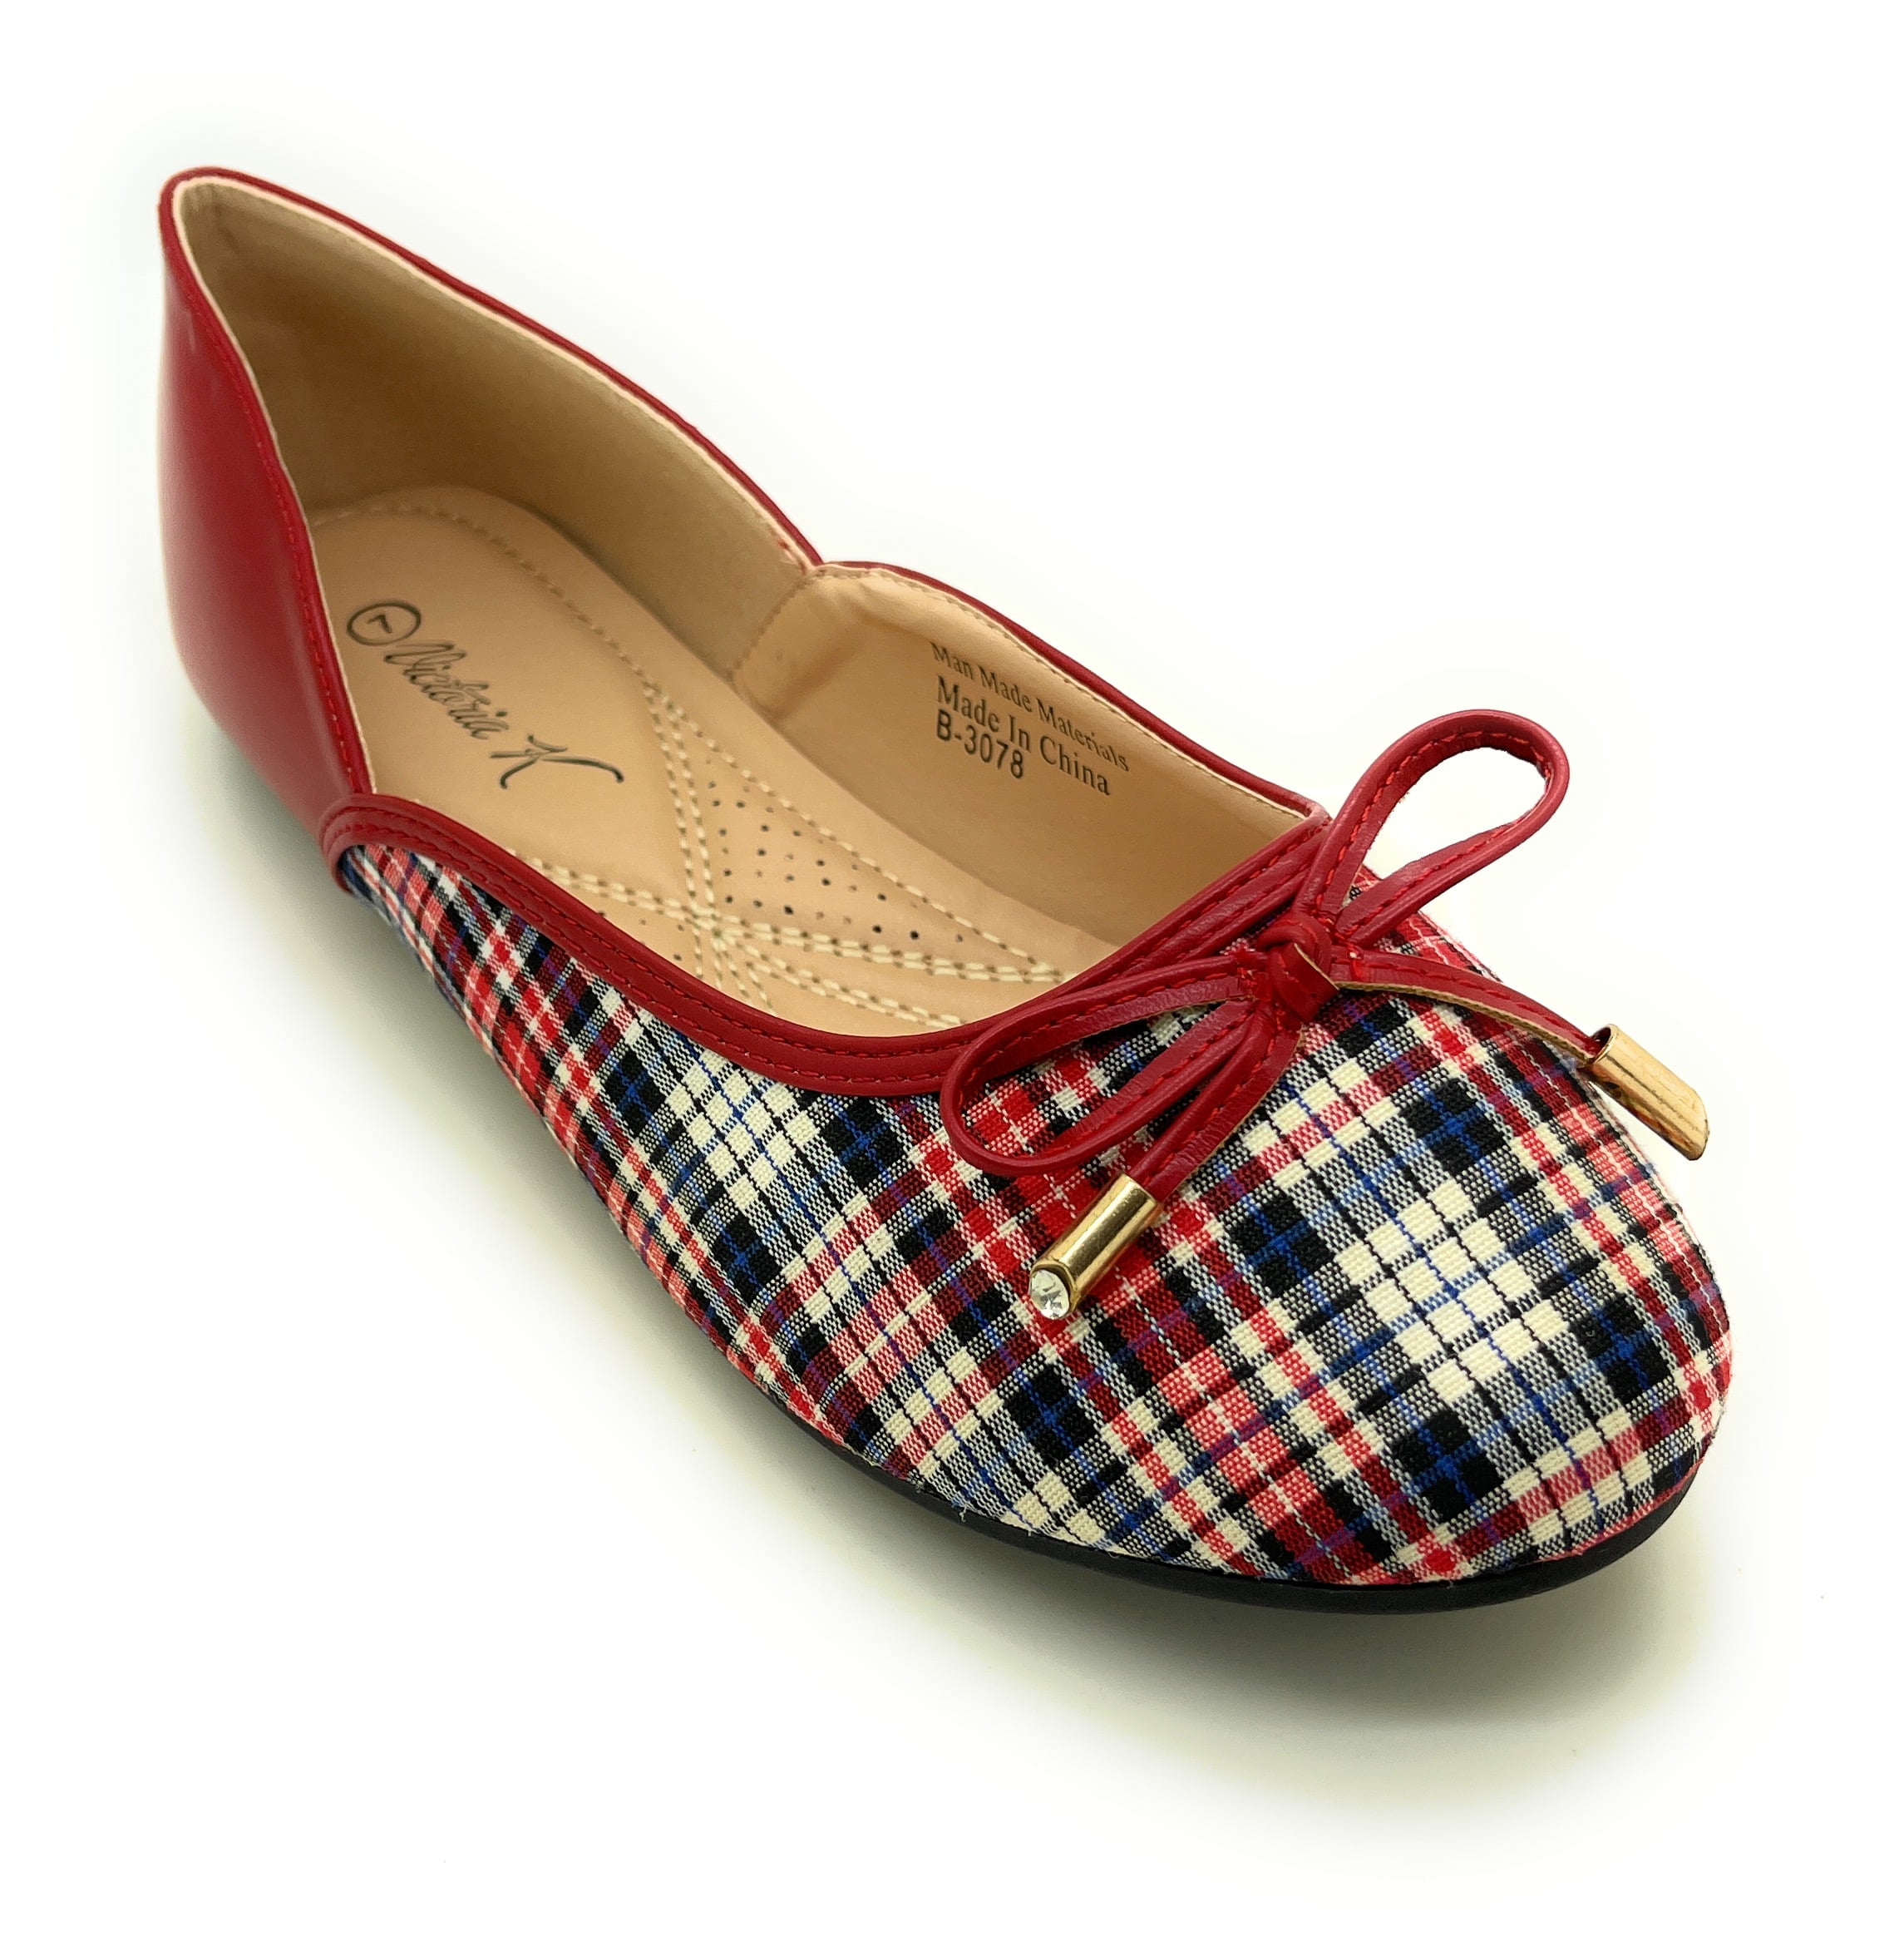 Two Tone Plaid with Solid Bow Ballerina Flats - Walmart.com